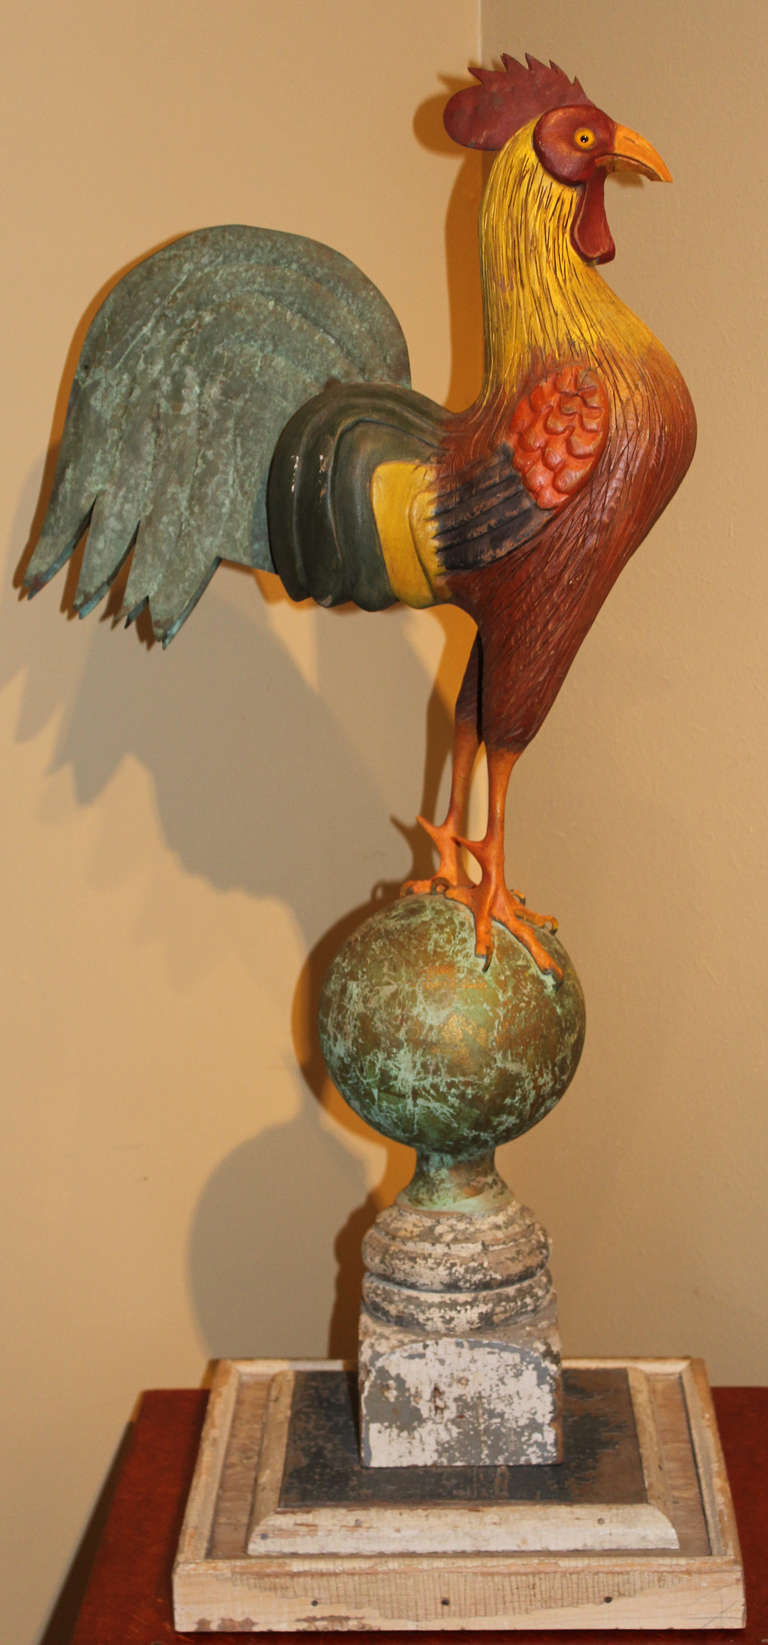 A colorful wooden folk art sculpture of a rooster with tin tail feathers created by self taught contemporary Roslyn Harbor, Long Island NY sculptor Thomas Langan (1942-). Tom began carving full time at age 35 when his subjects grew to include